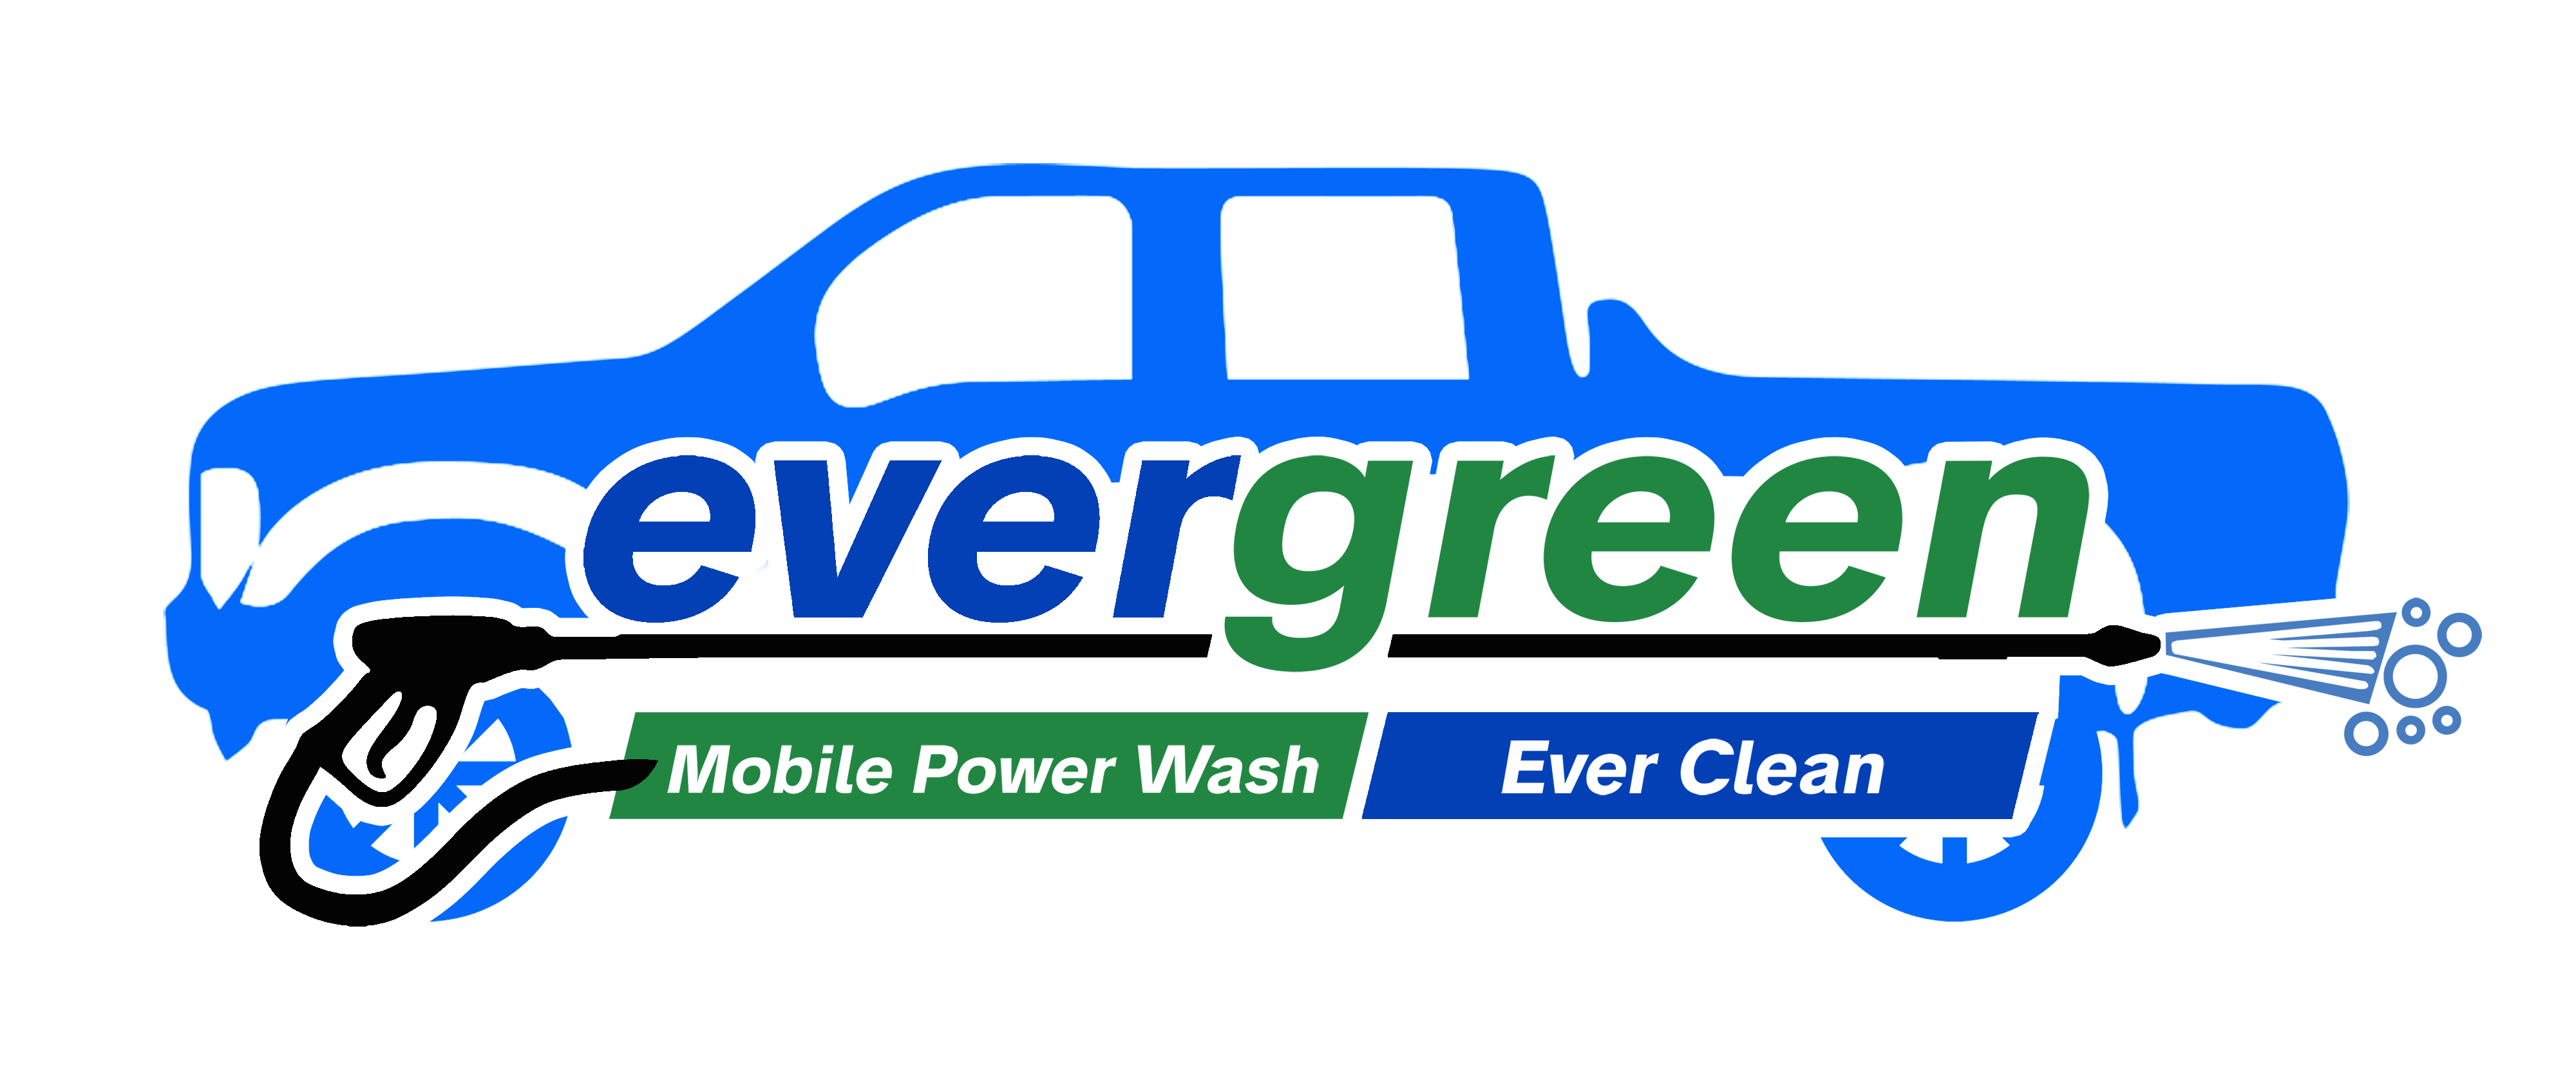 evergreen mobile detail services seattle